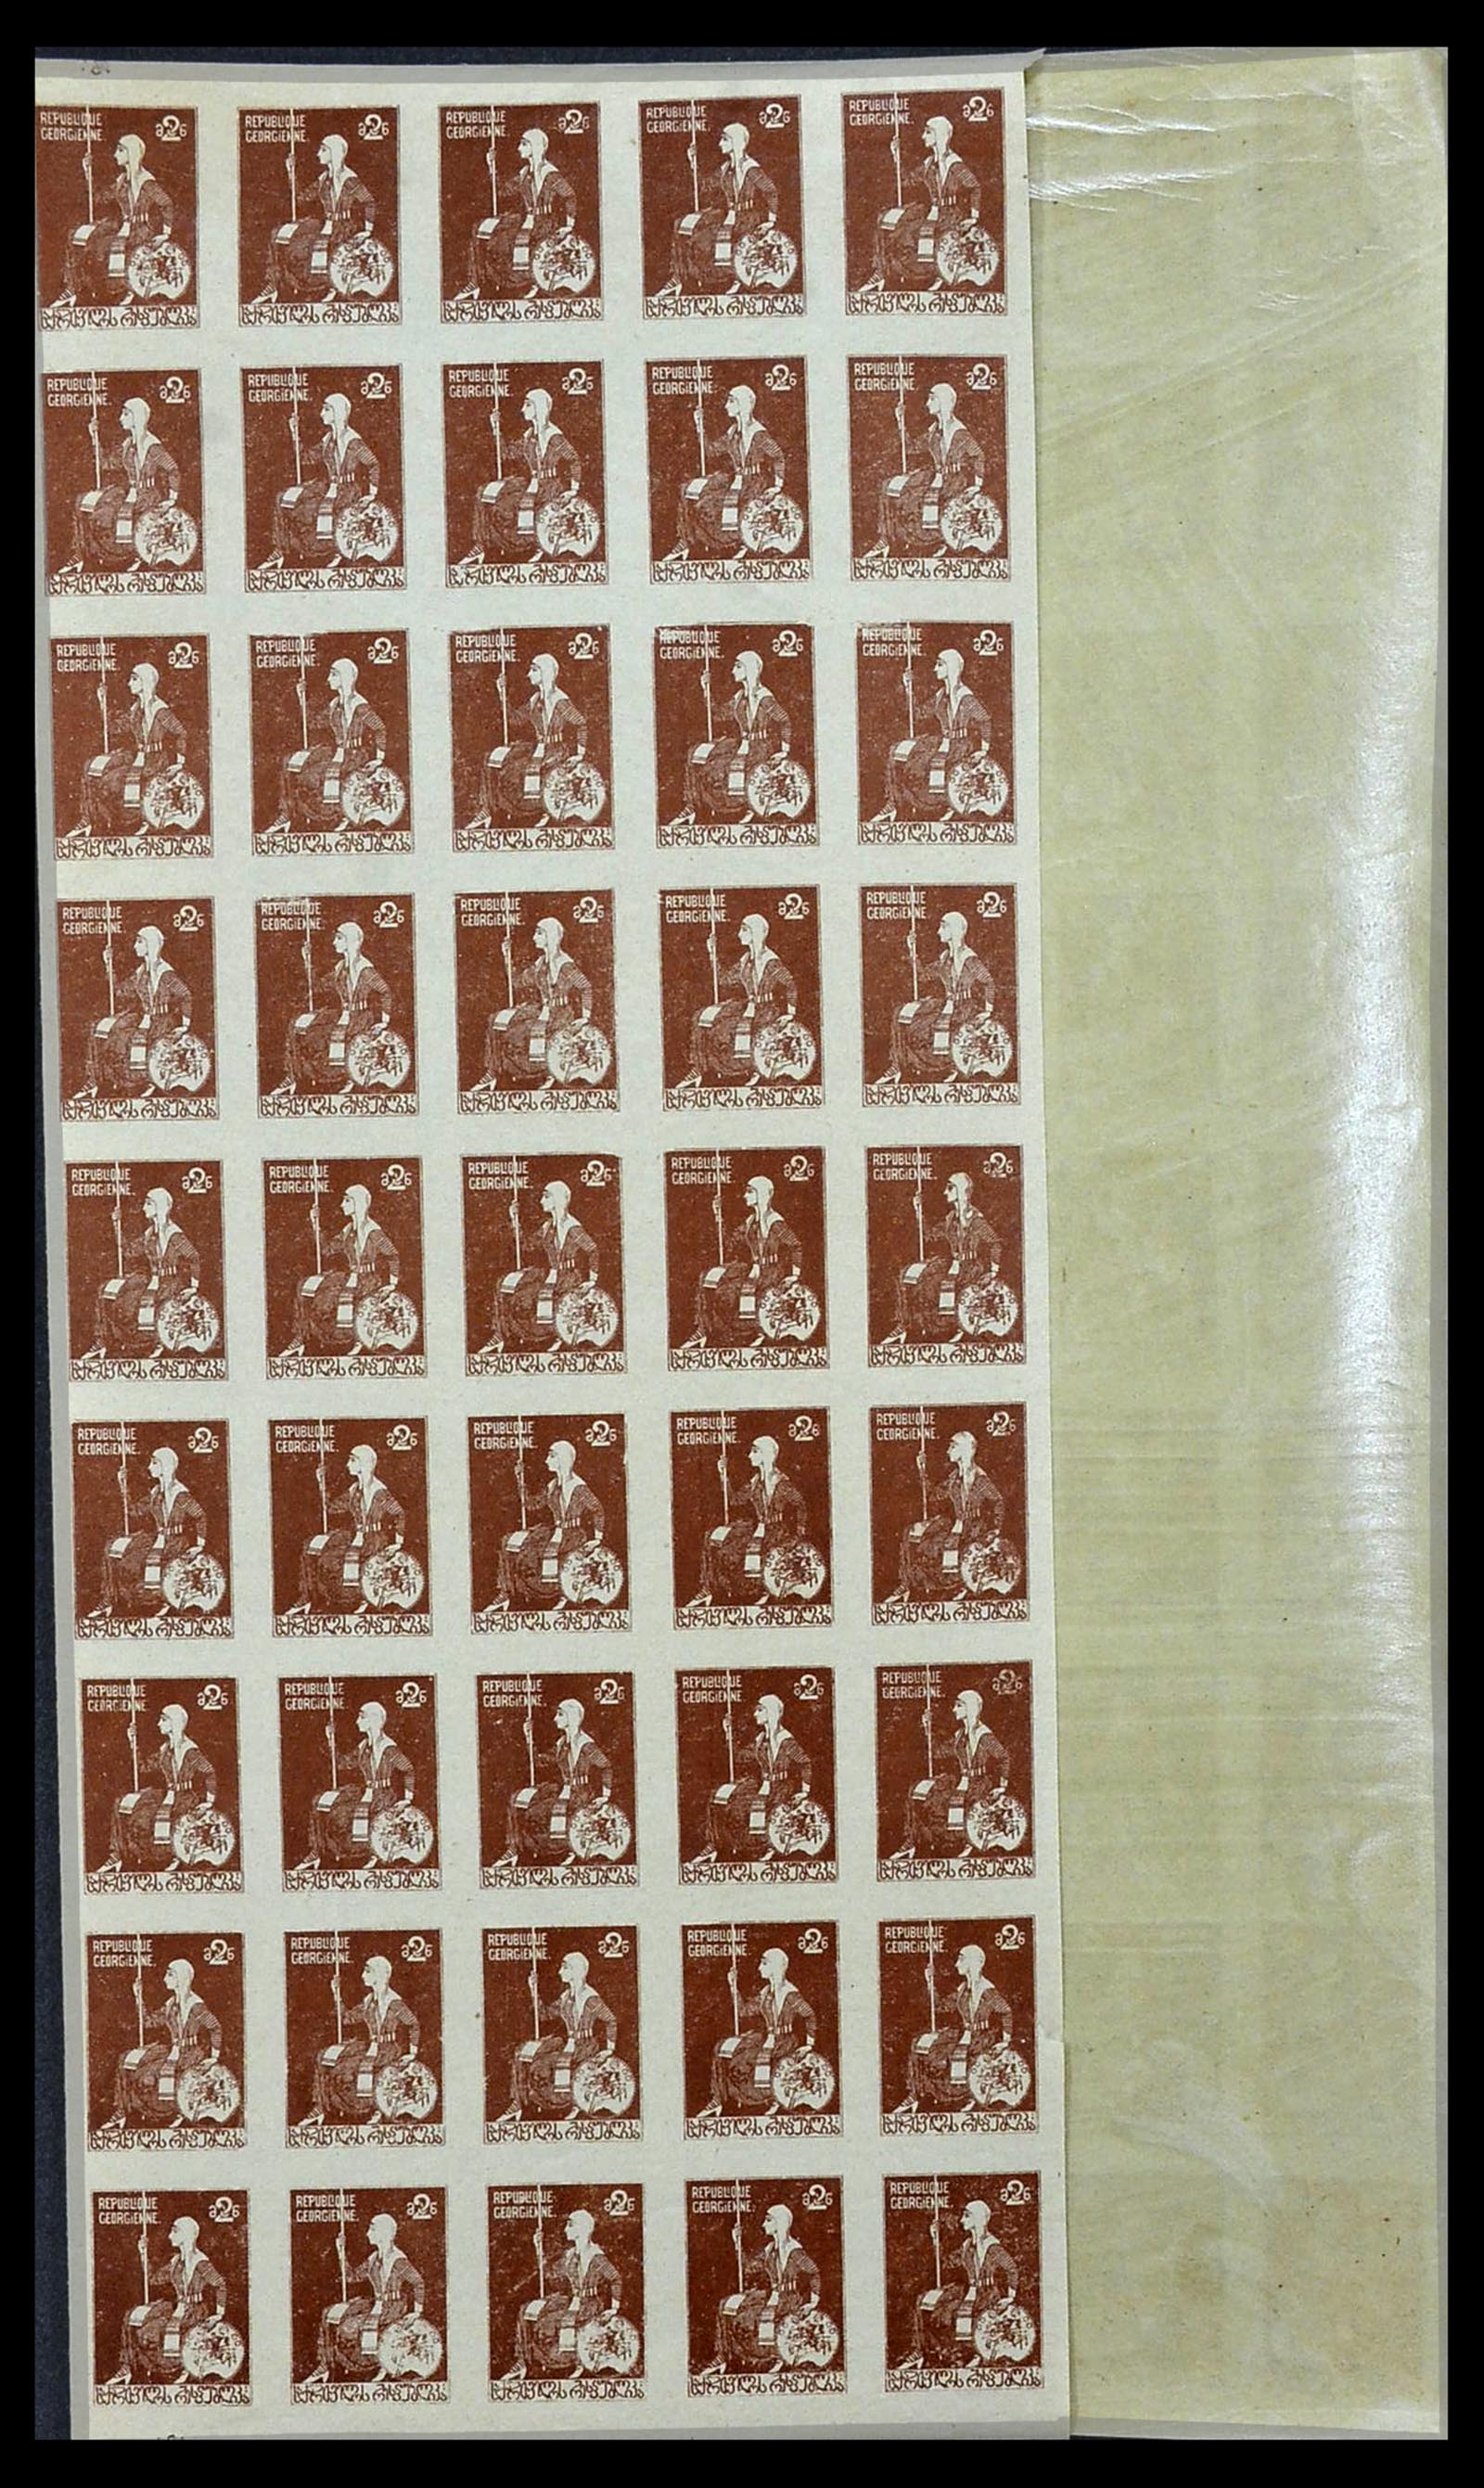 34254 033 - Stamp collection 34254 Georgia 1919.